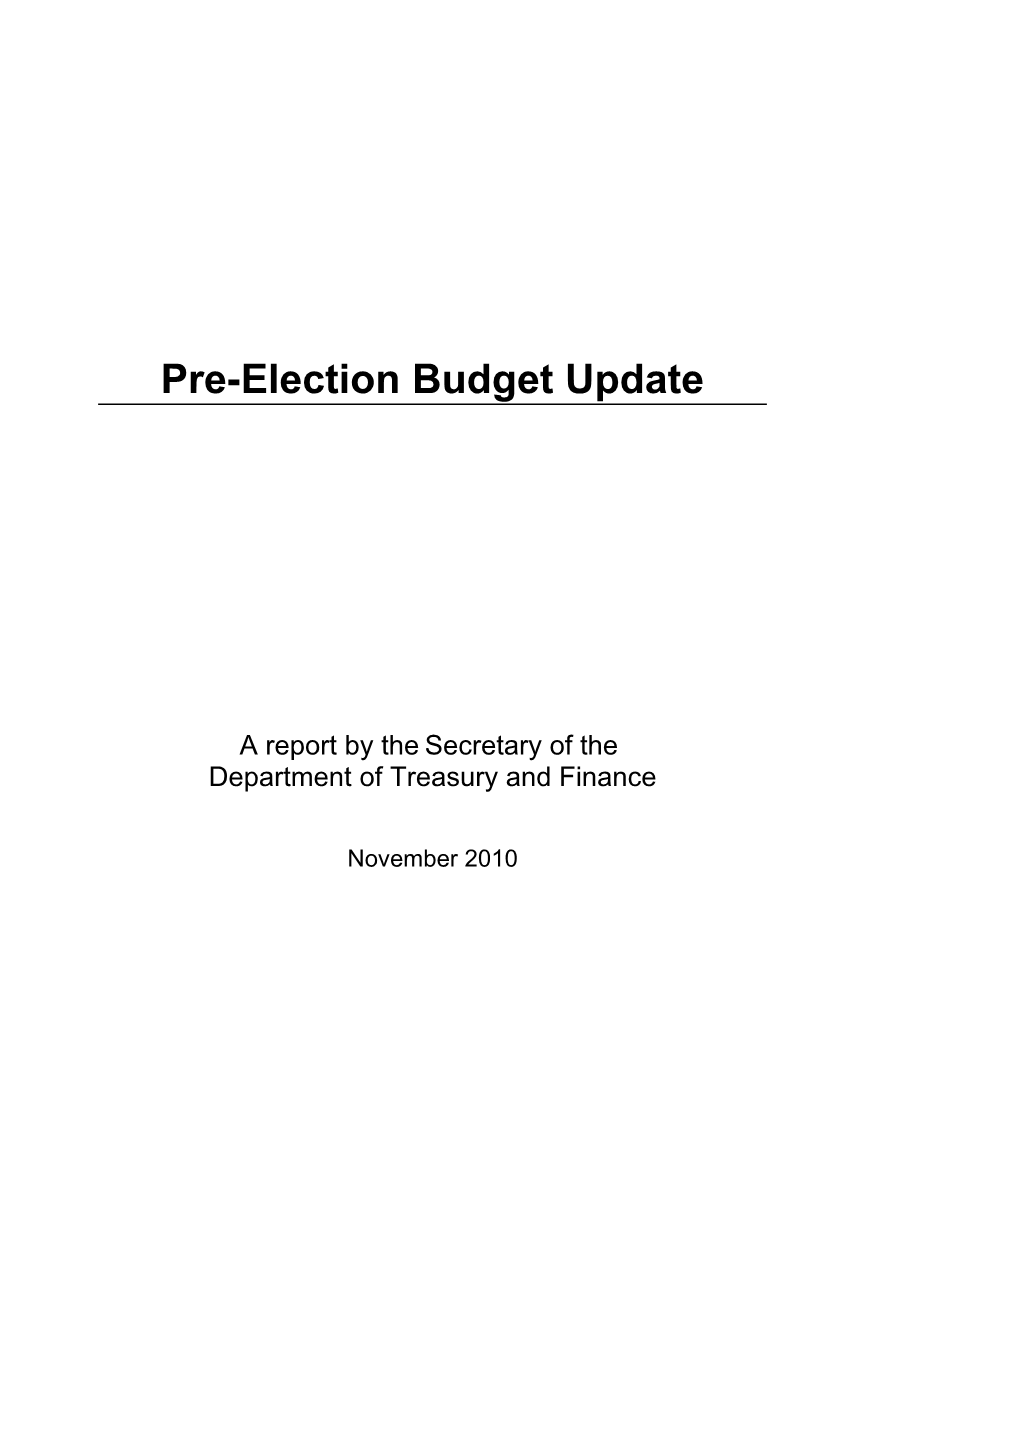 Preelection Budget Update